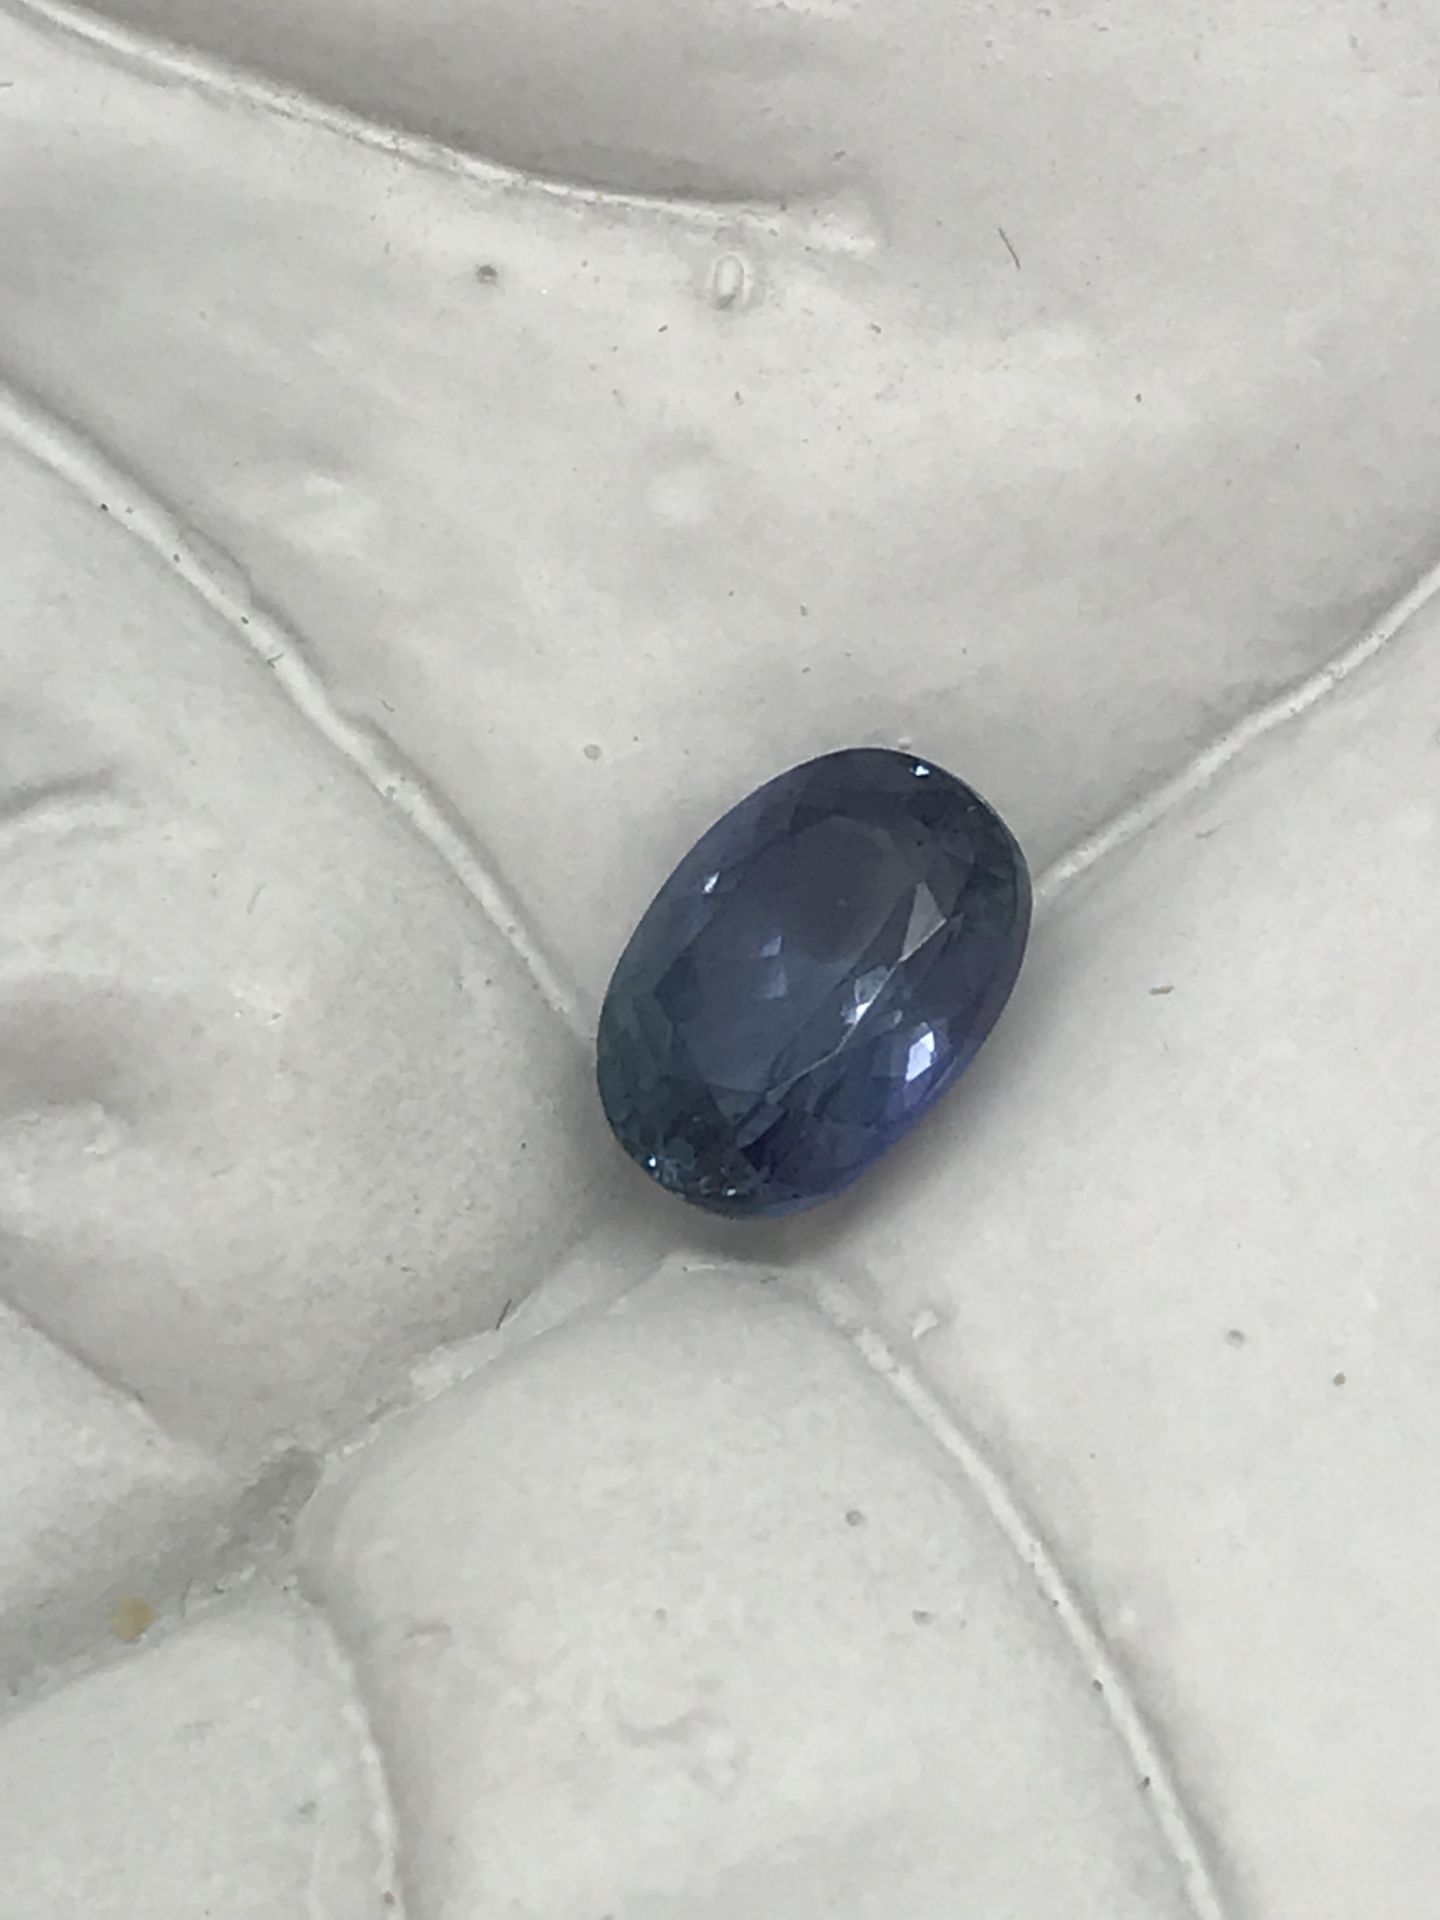 $600 REPLACEMENT VALUE GSL CERTIFICATE 3.21 CT NATURAL LOOSE TANZANITE - Image 4 of 5